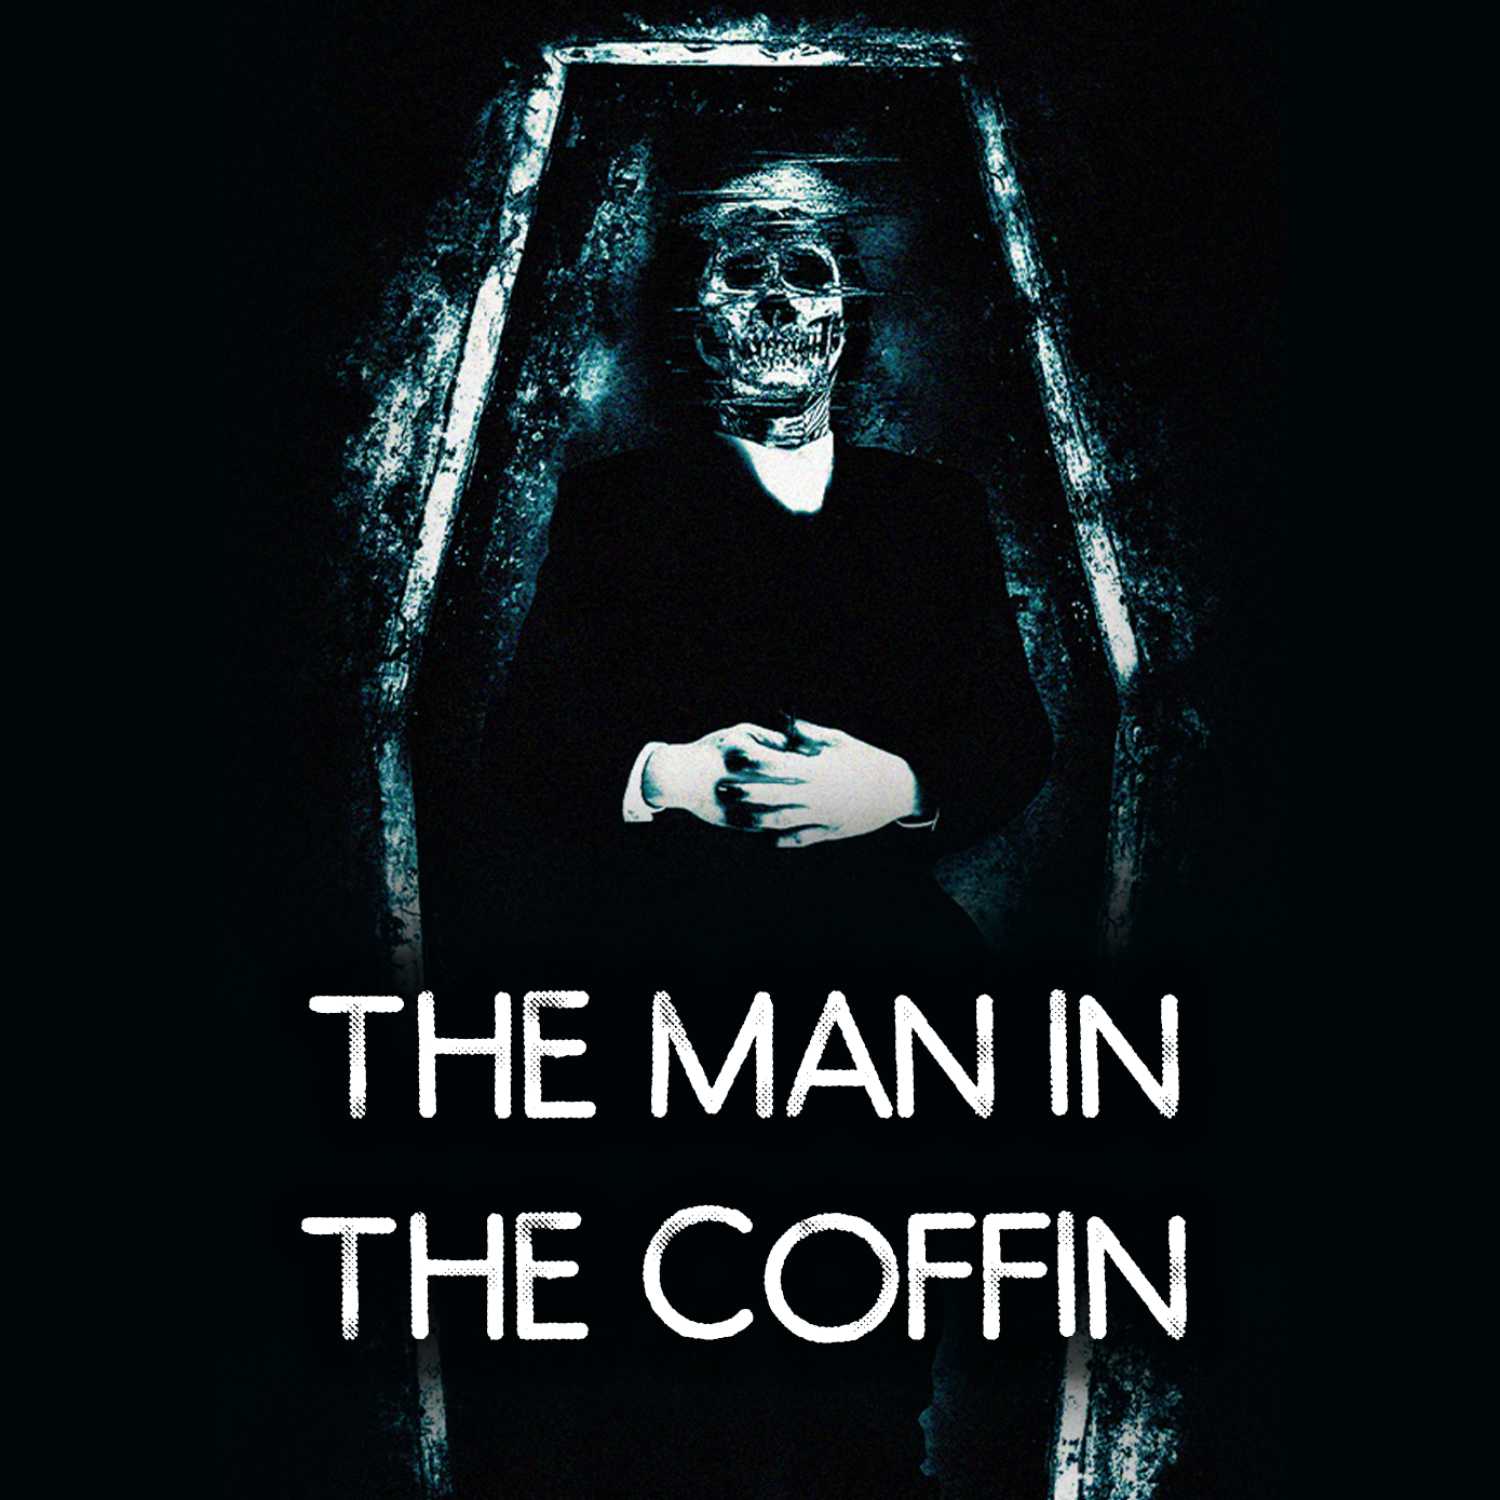 The Man in the Coffin